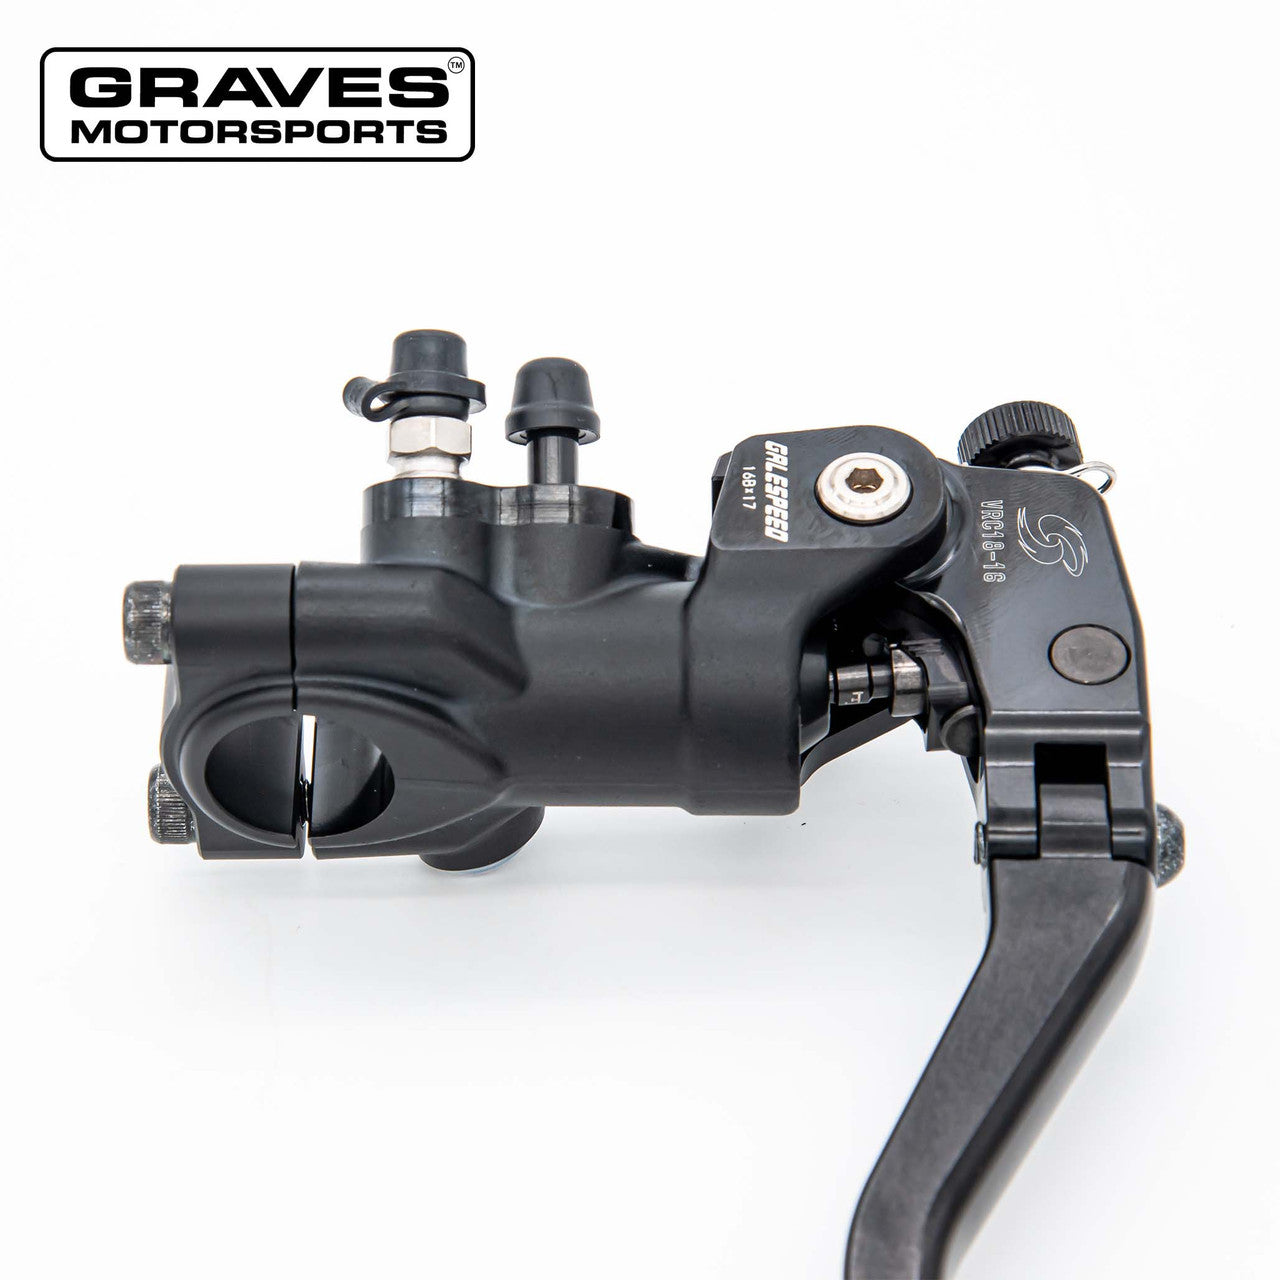 Galespeed VRD Master Cylinder 16mm GS-VRD16A-17BS